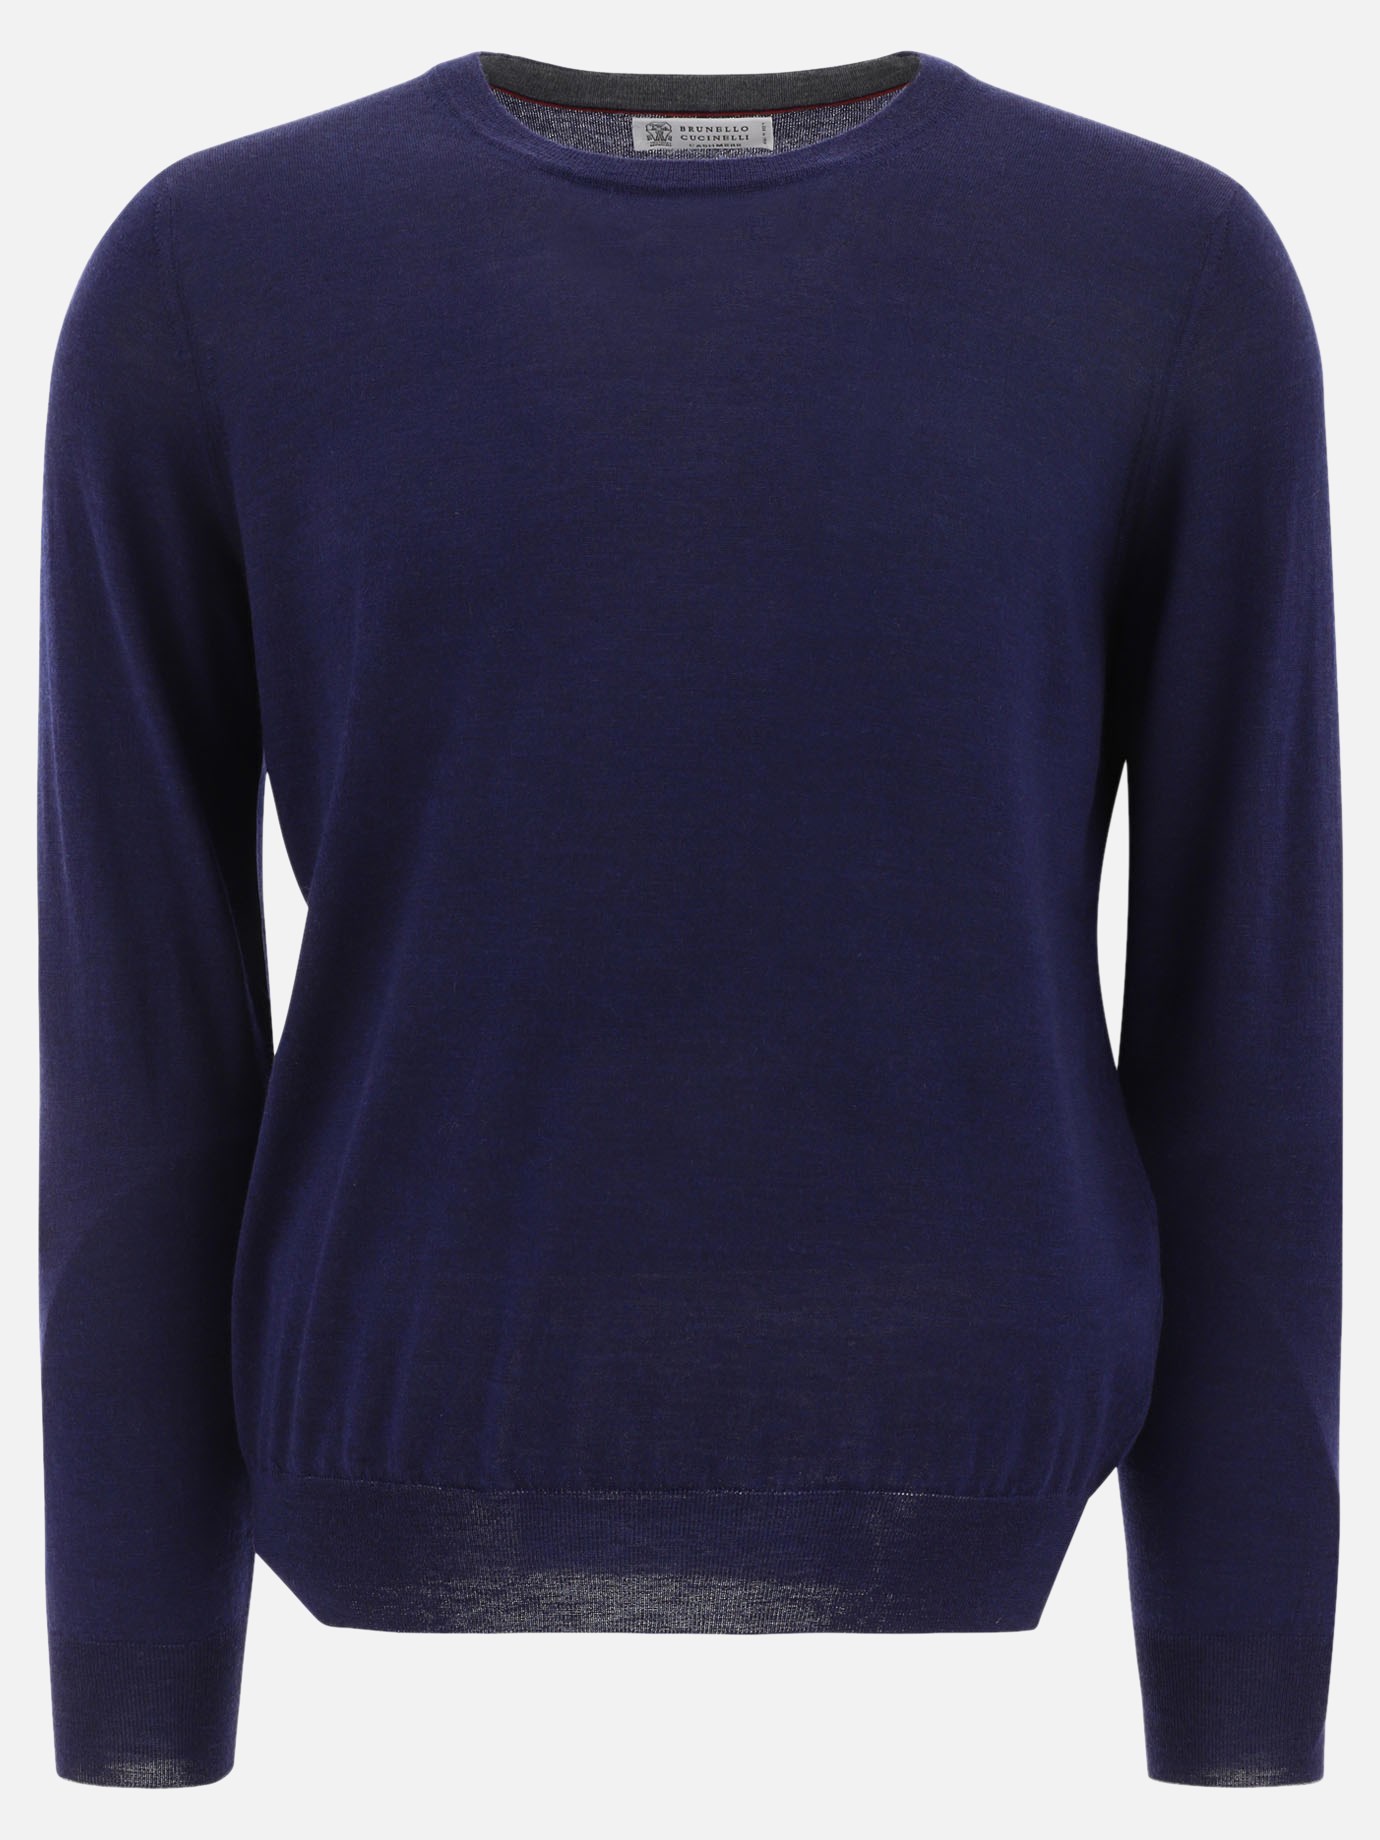 Sweater with ribbed hem and cuffs